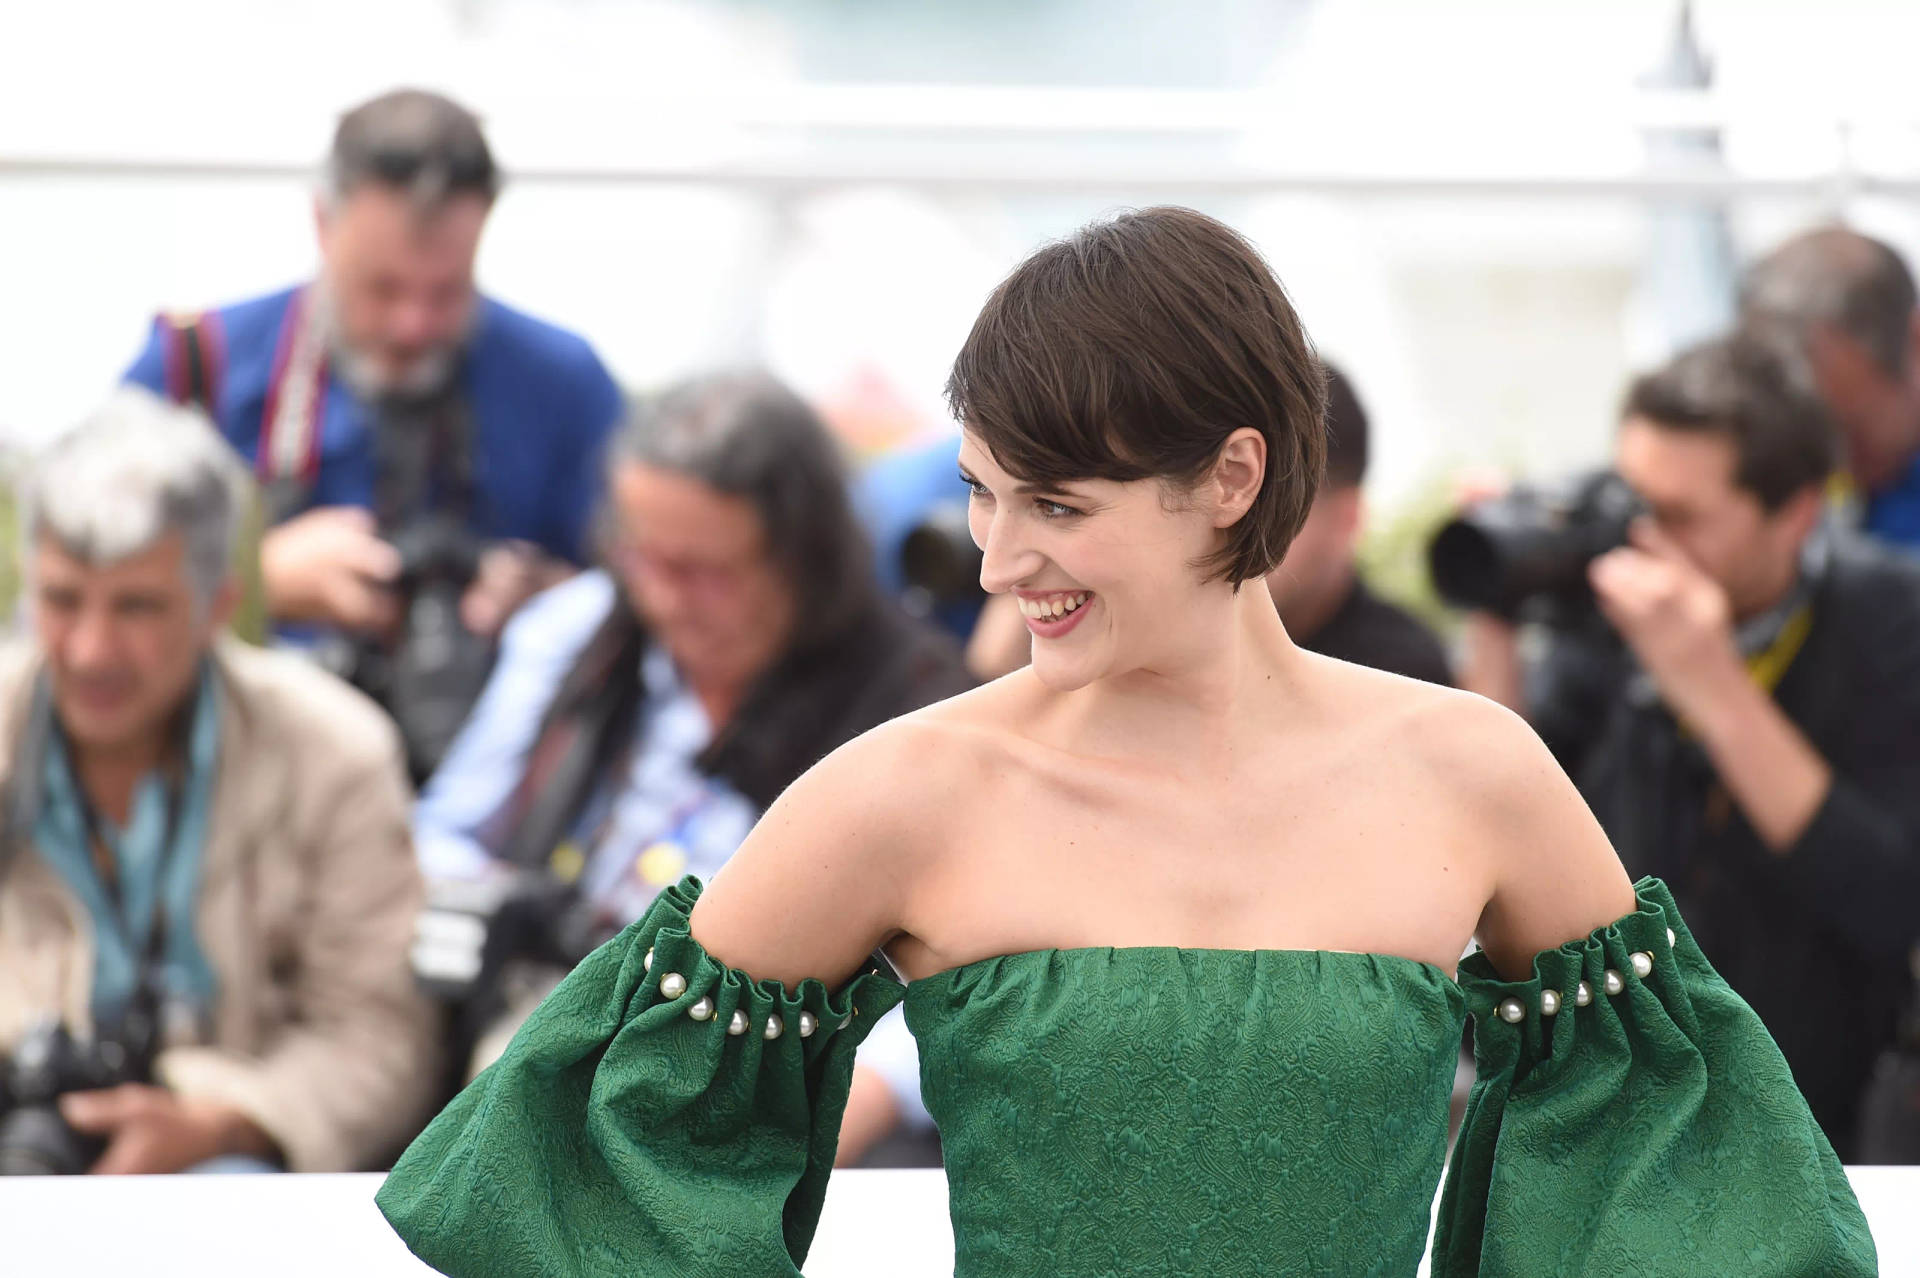 Phoebe As Fleabag In Cannes